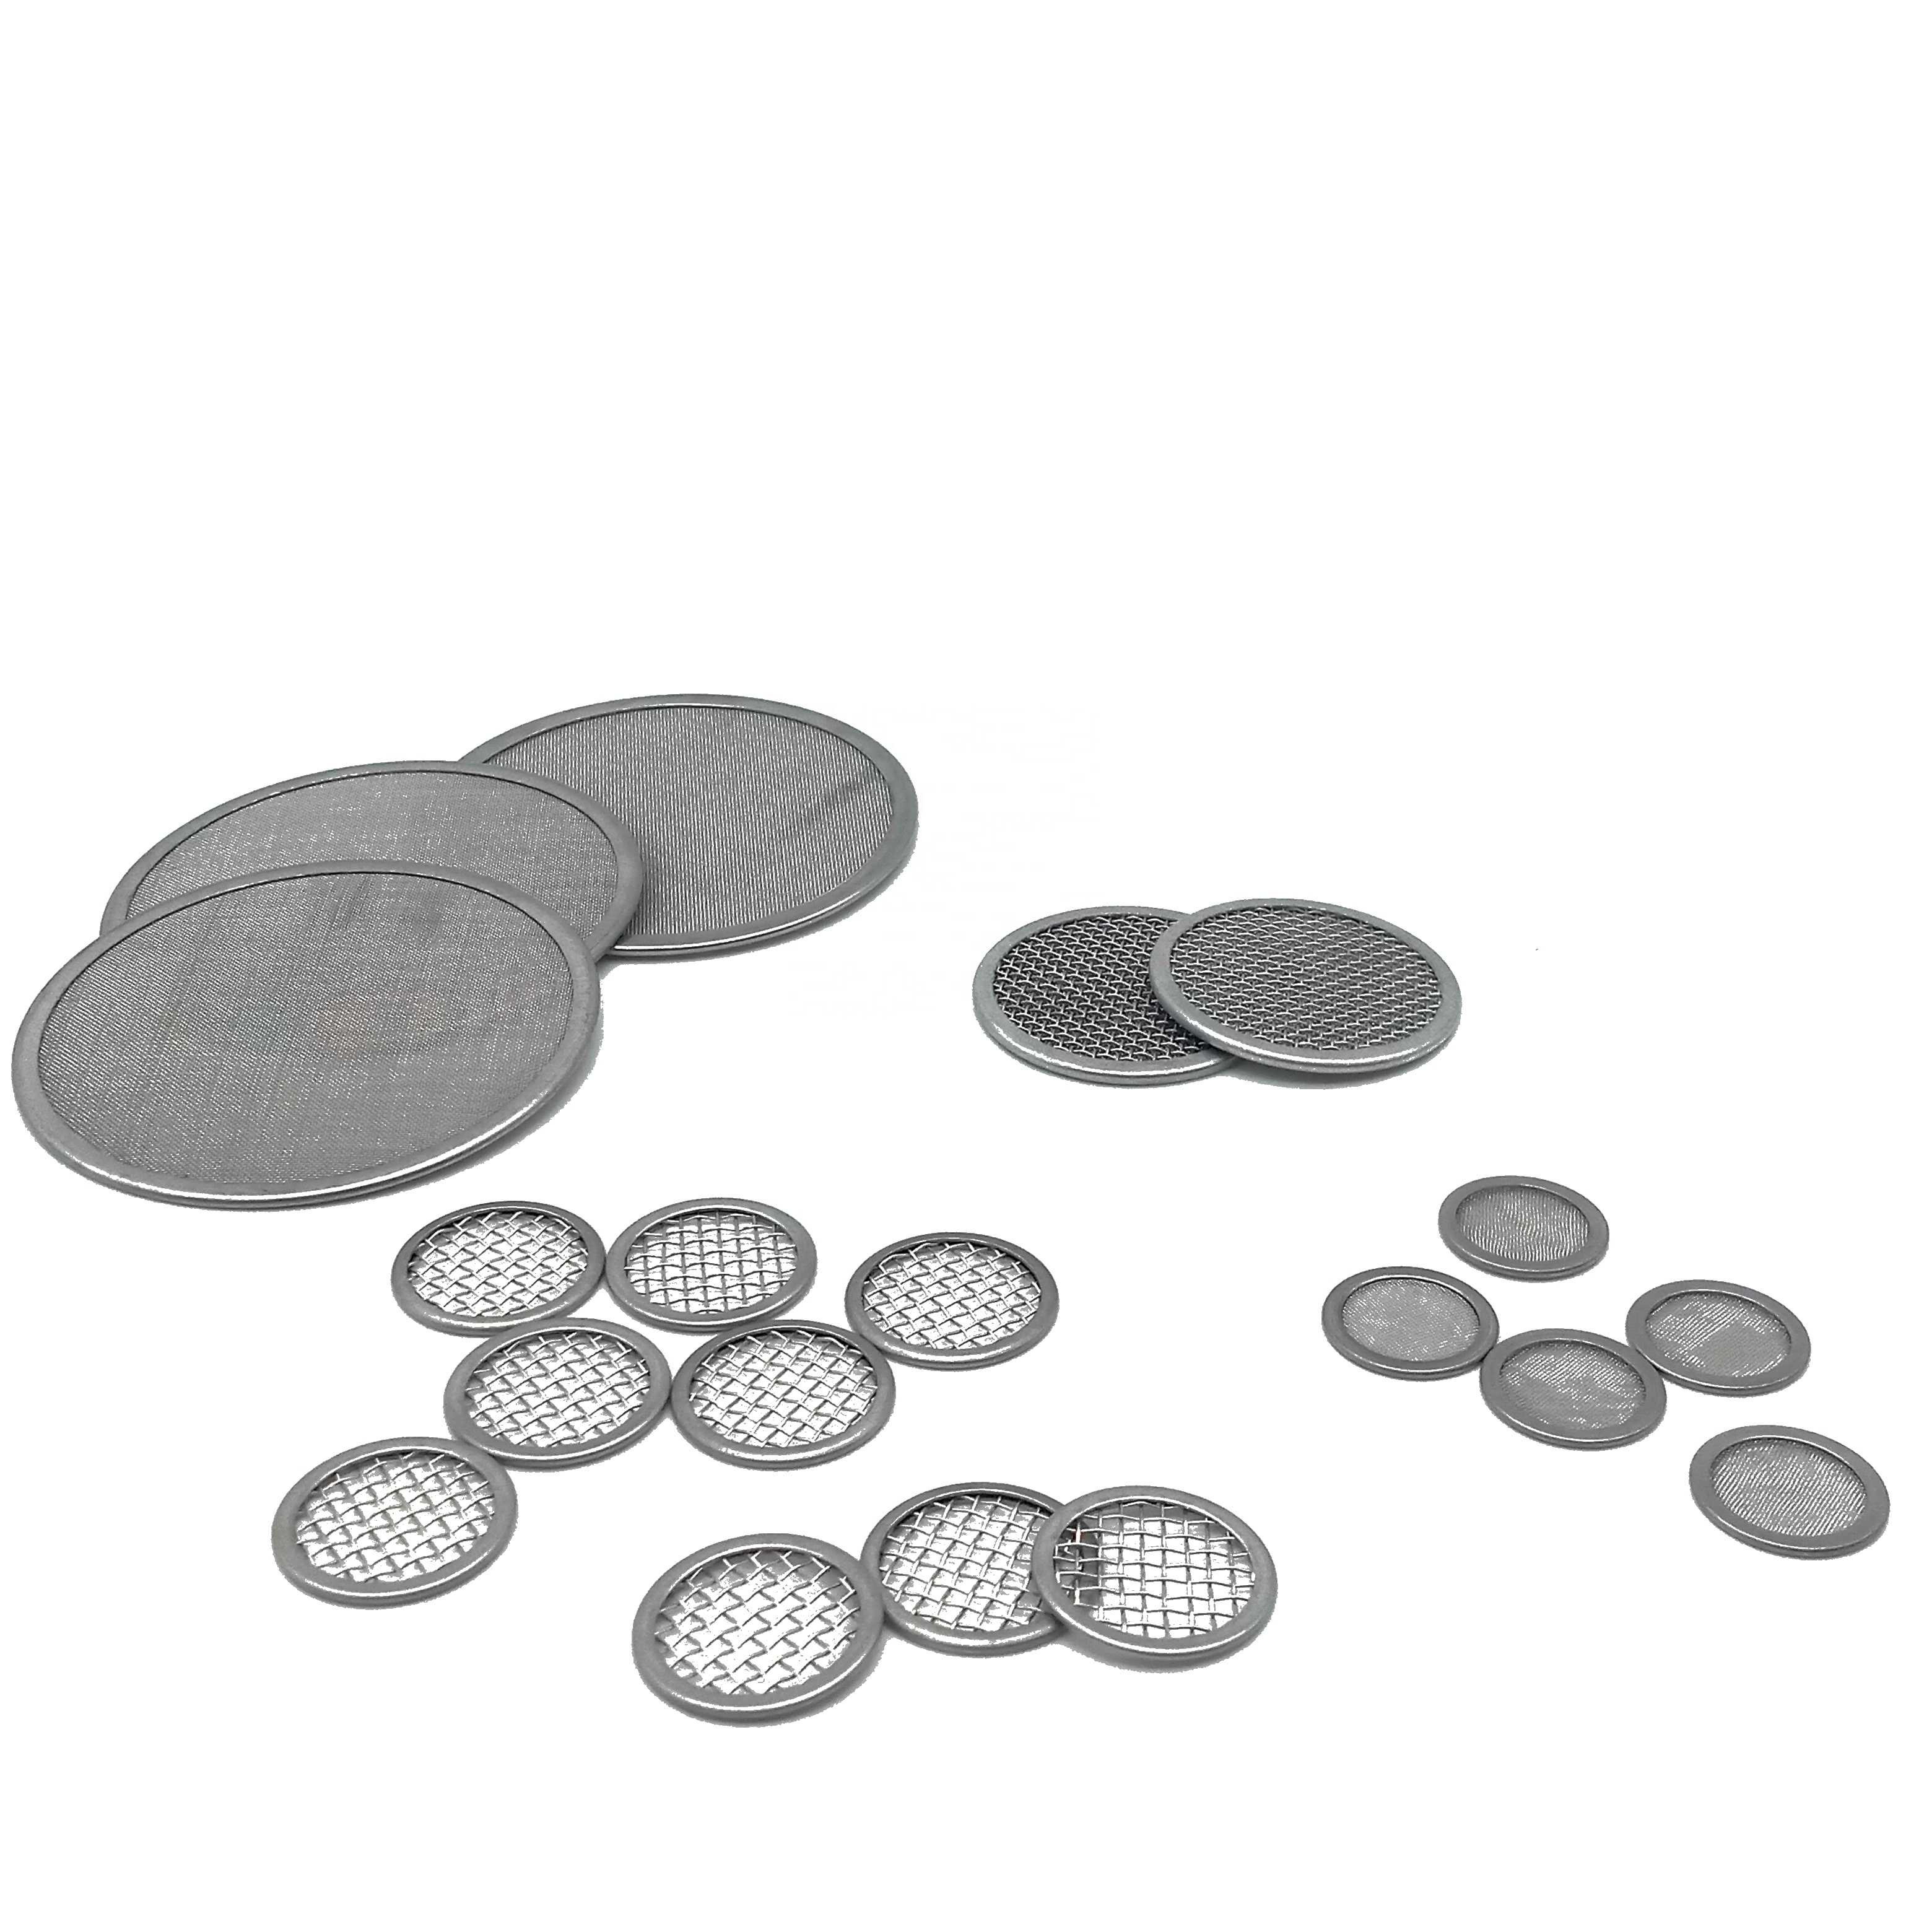 China wholesale Activated Carbon Filter - China Supply Round Stainless Steel Welded Woven Filter Disc – Dongjie